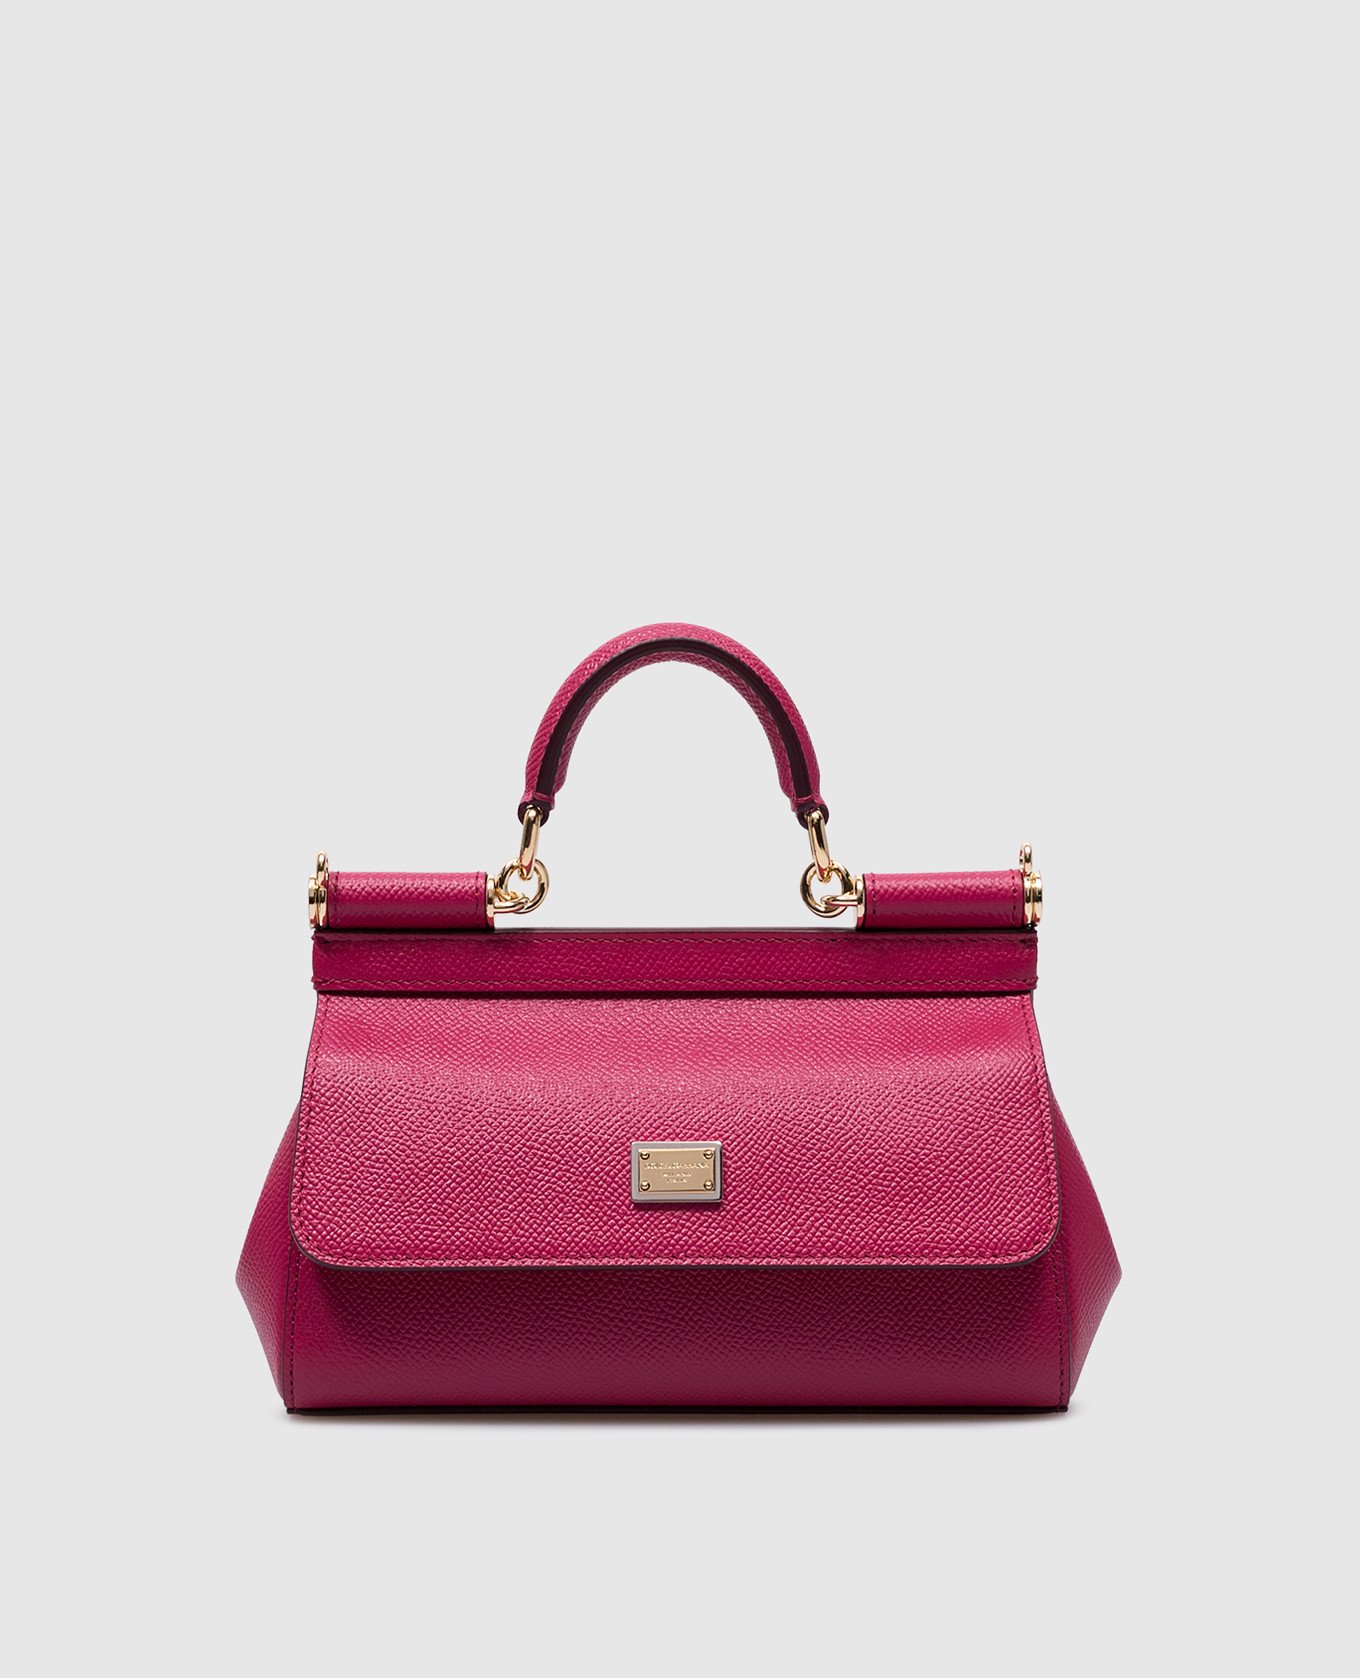 Sicily pink leather bag with metal logo